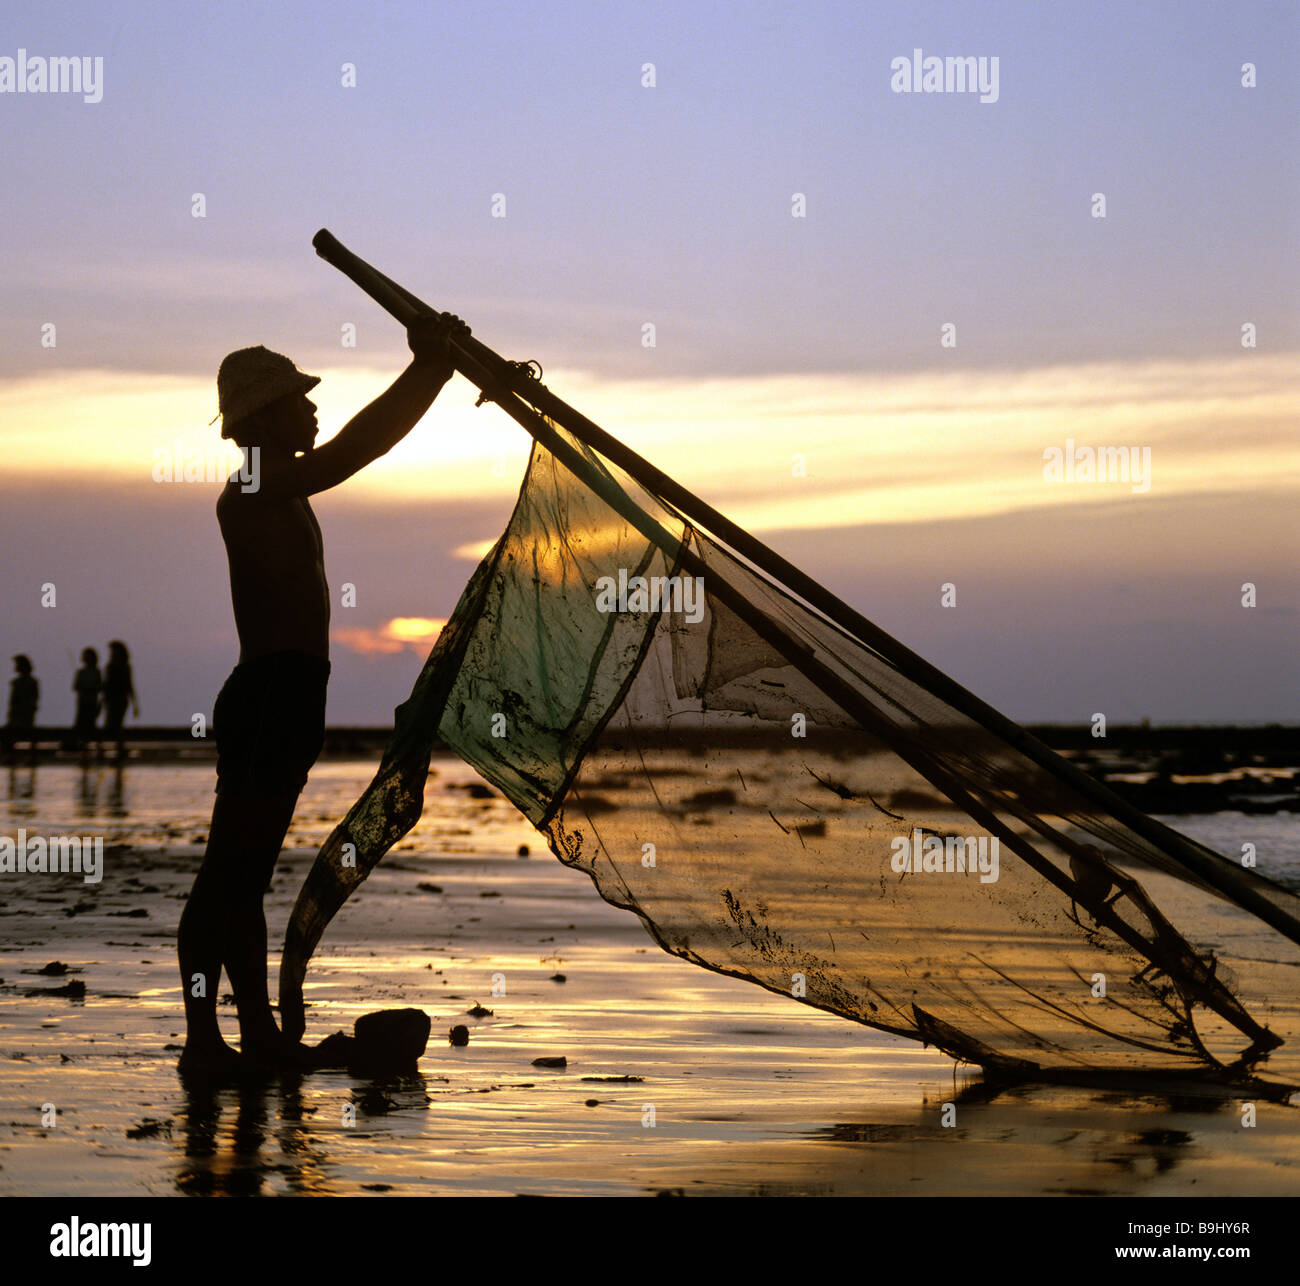 Fisherman with a net, ocean, evening light, Bali, Indonesia, south-east Asia Stock Photo